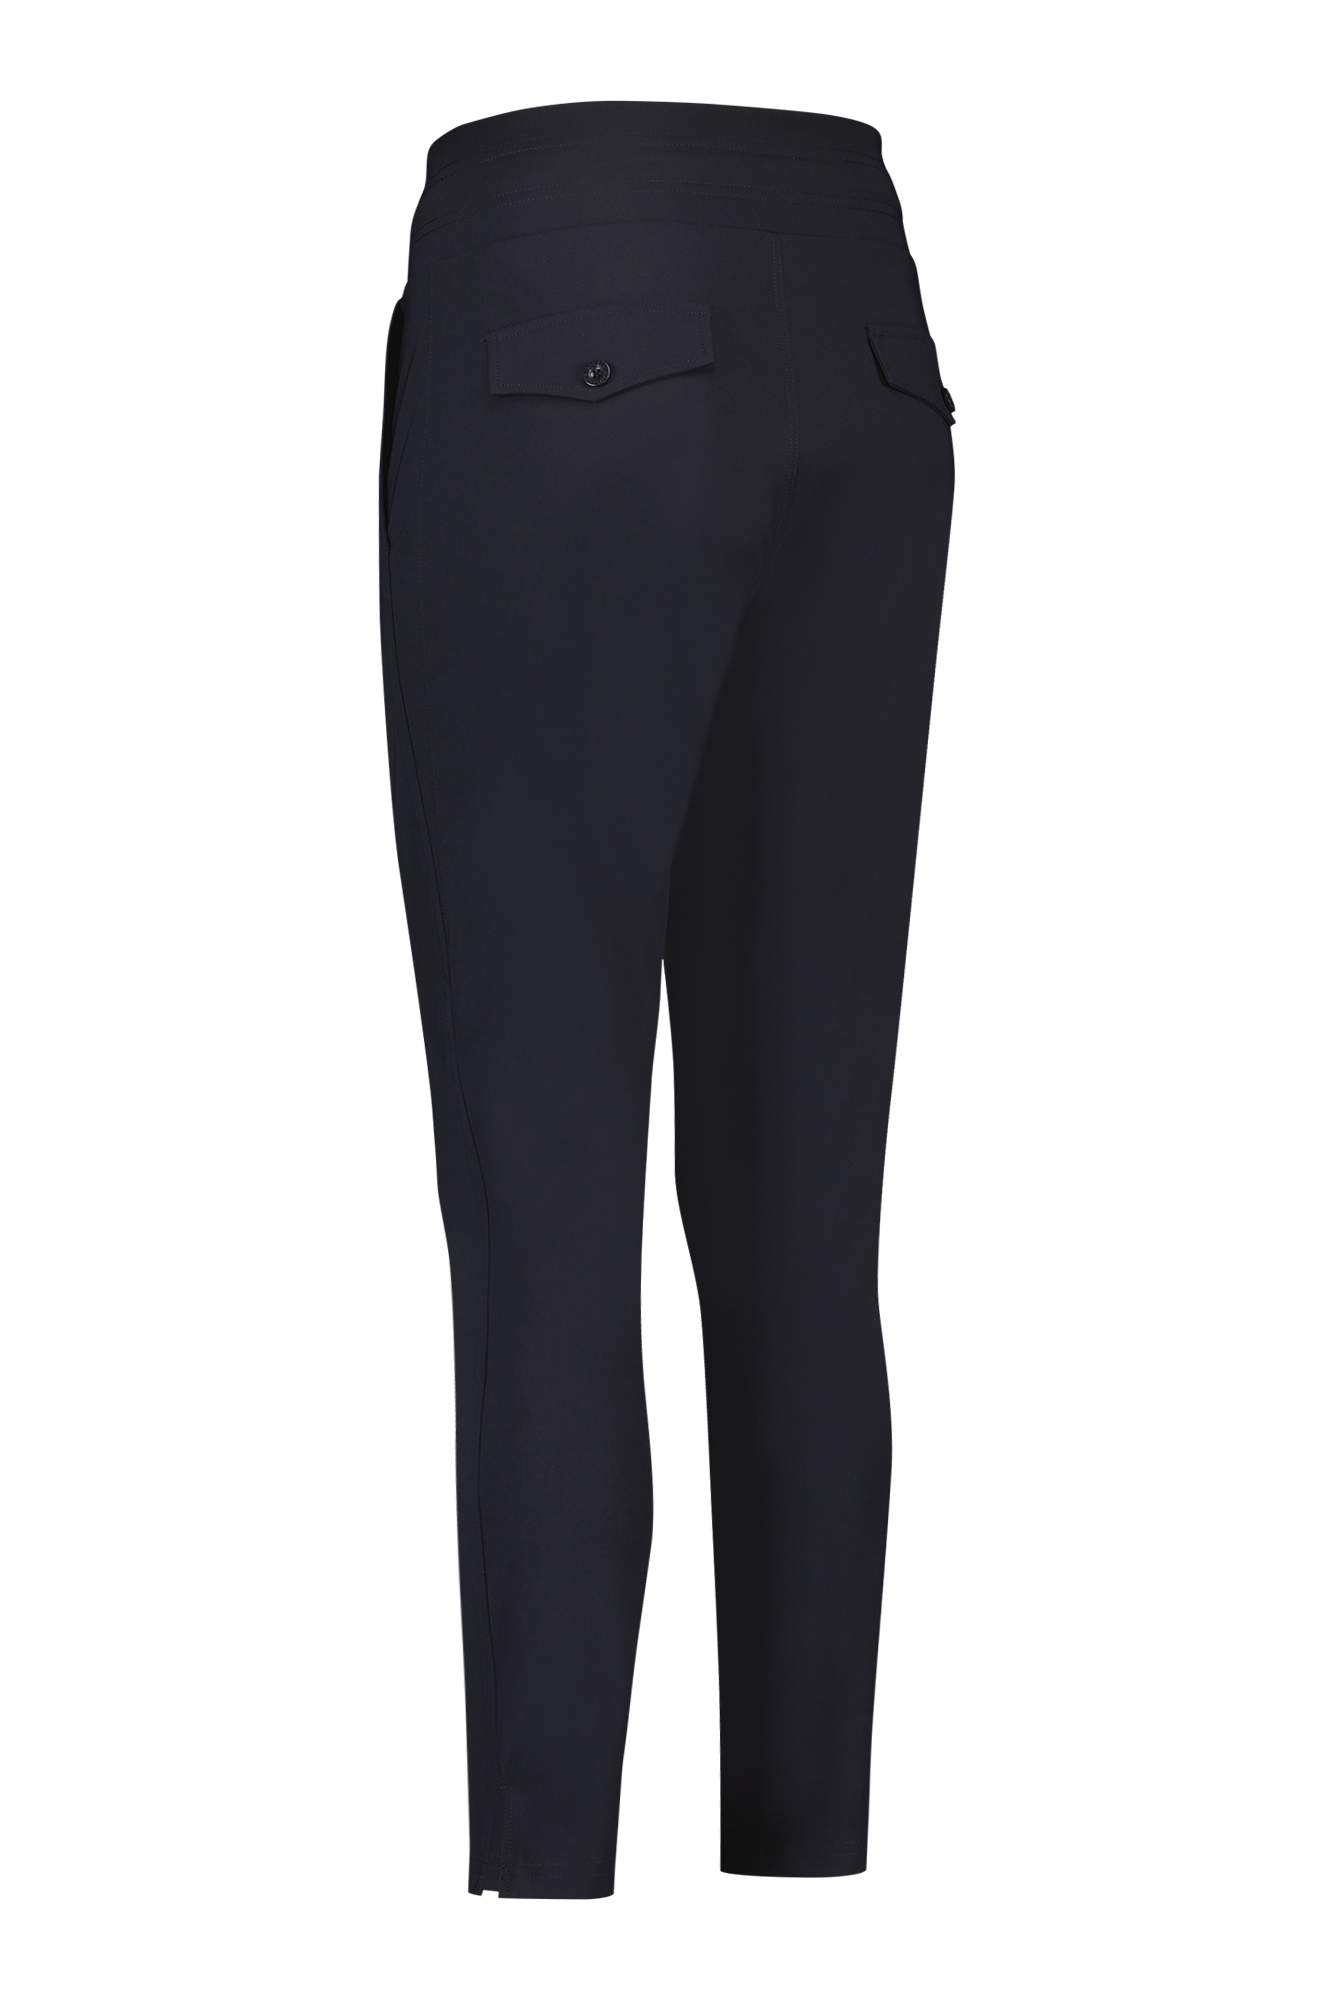 Studio Anneloes startup trousers Blauw-1 4